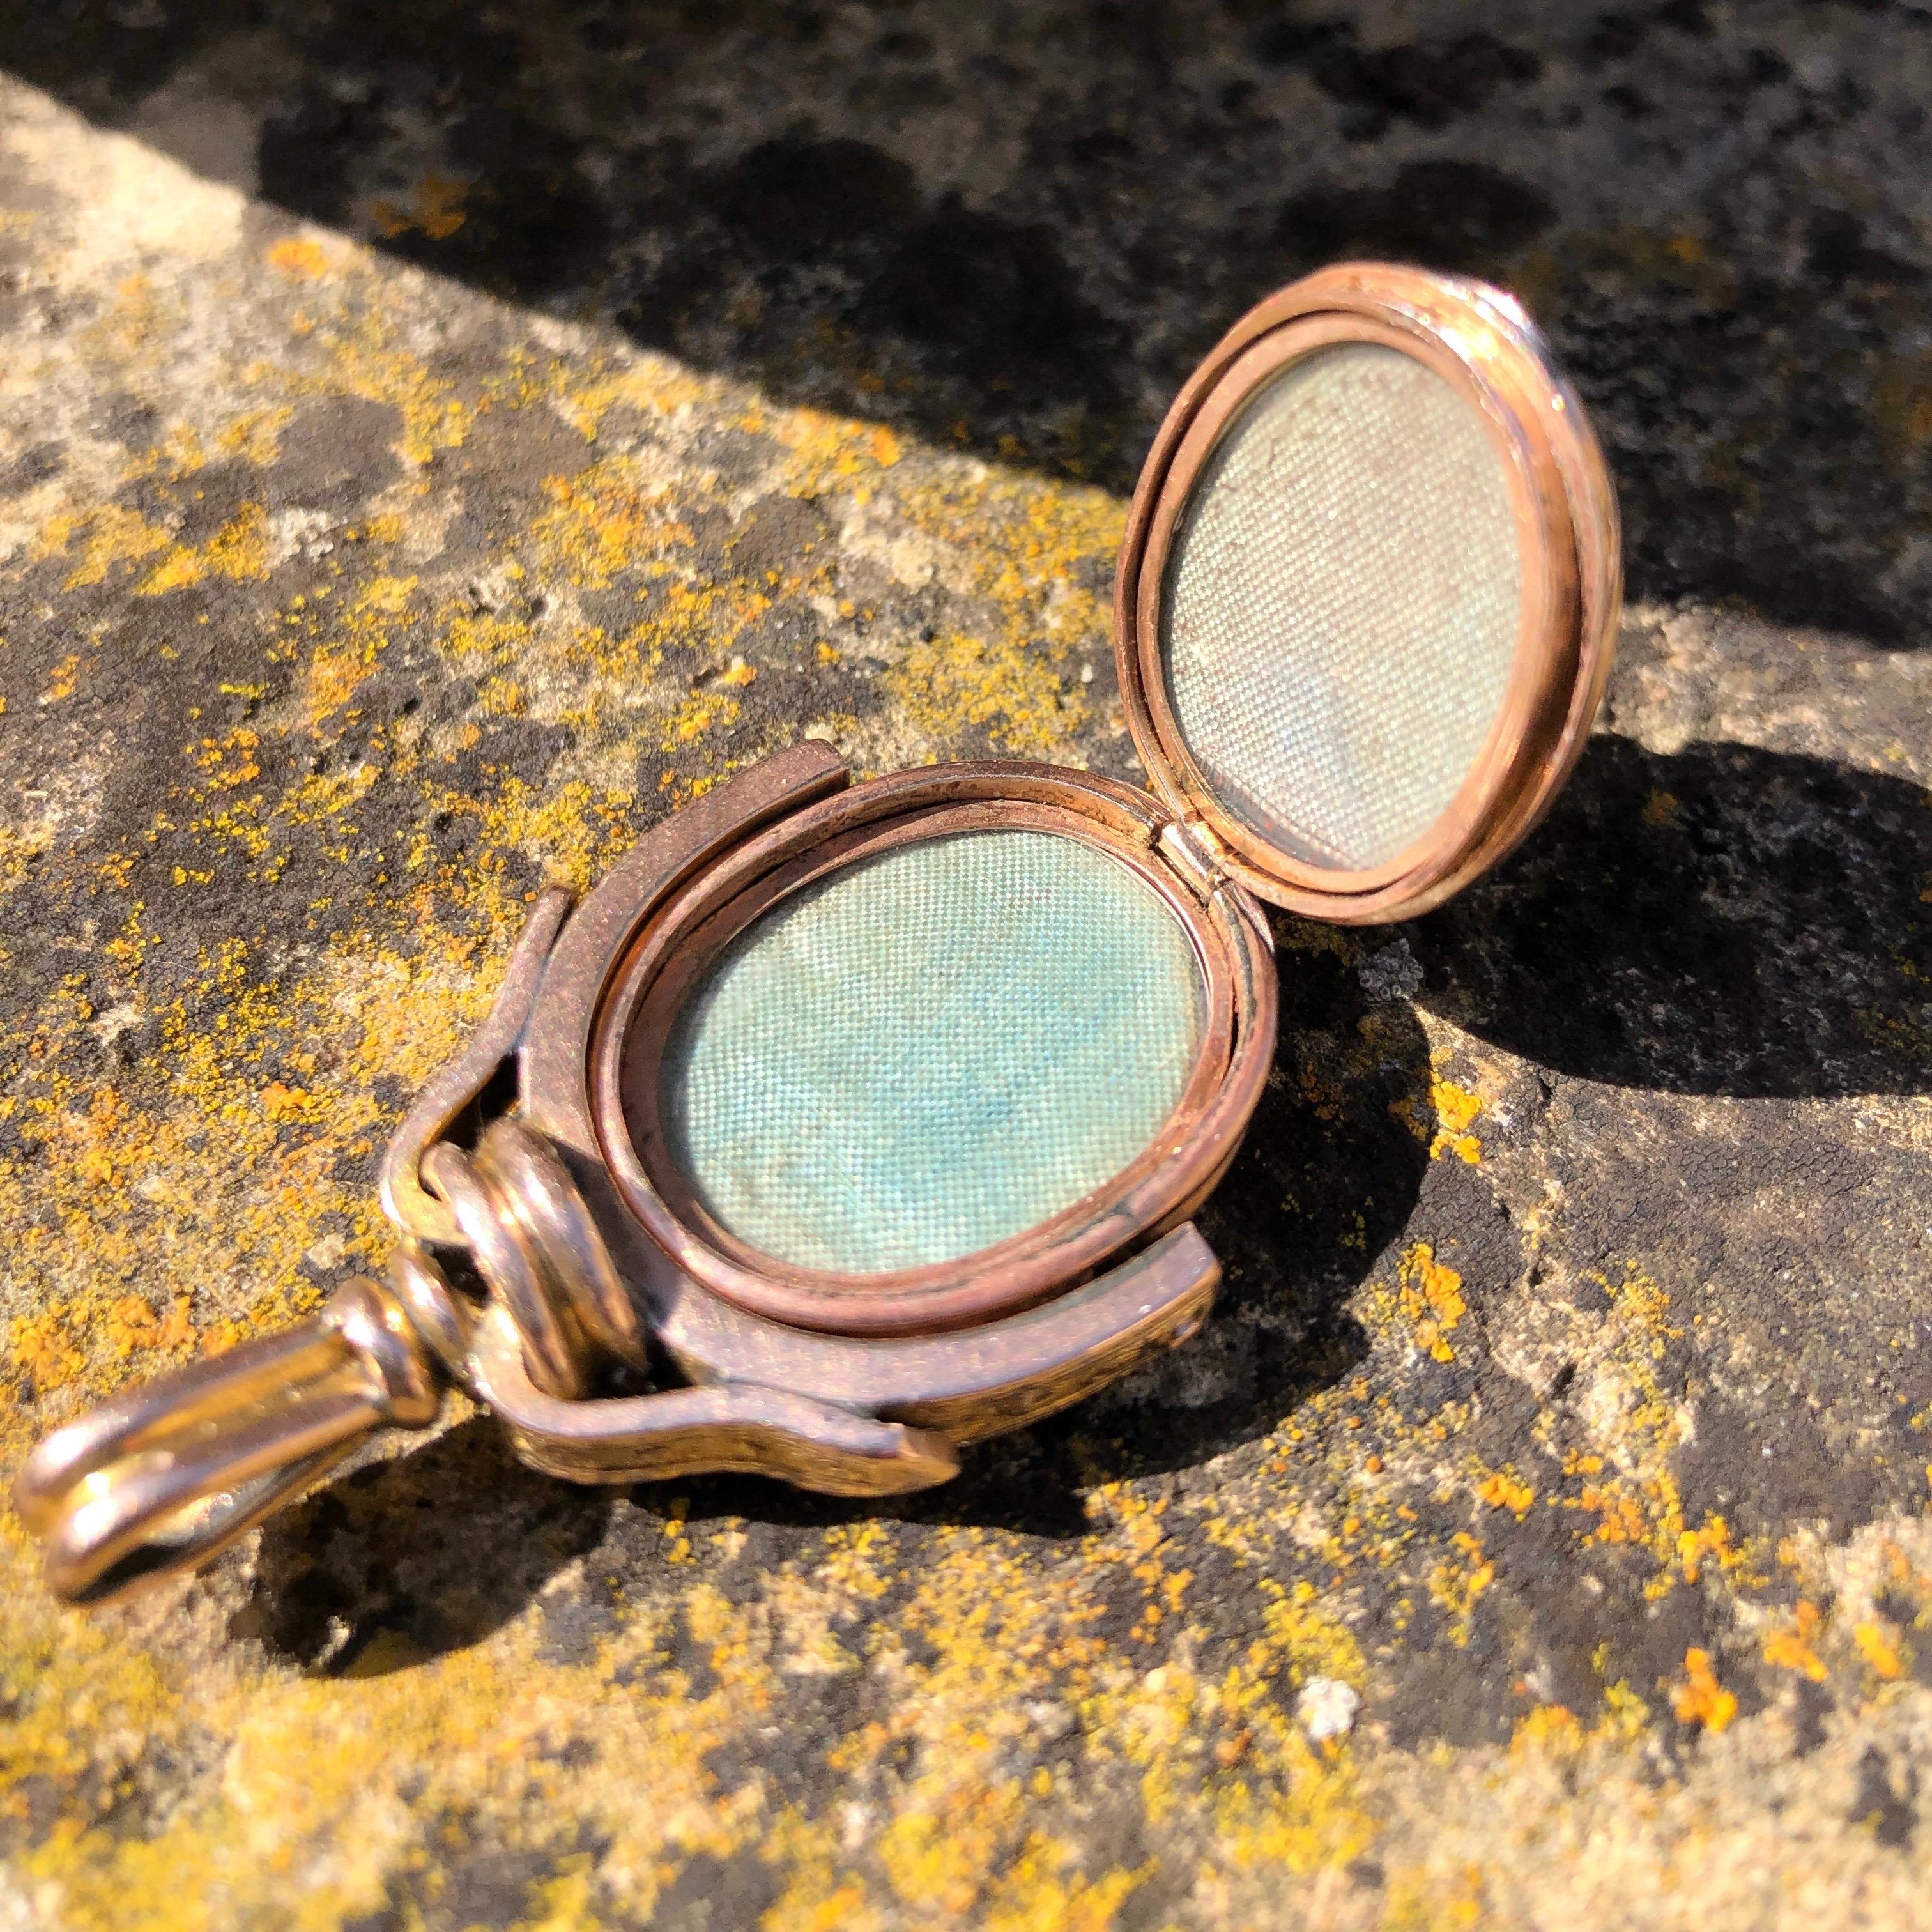 This classic 9ct gold fob holds a carnelian and bloodstone but the unusual element is that it is actually a locket! As you can see the locket opens and reveals a secret compartment to put a loved ones photo or lock of hair. 



